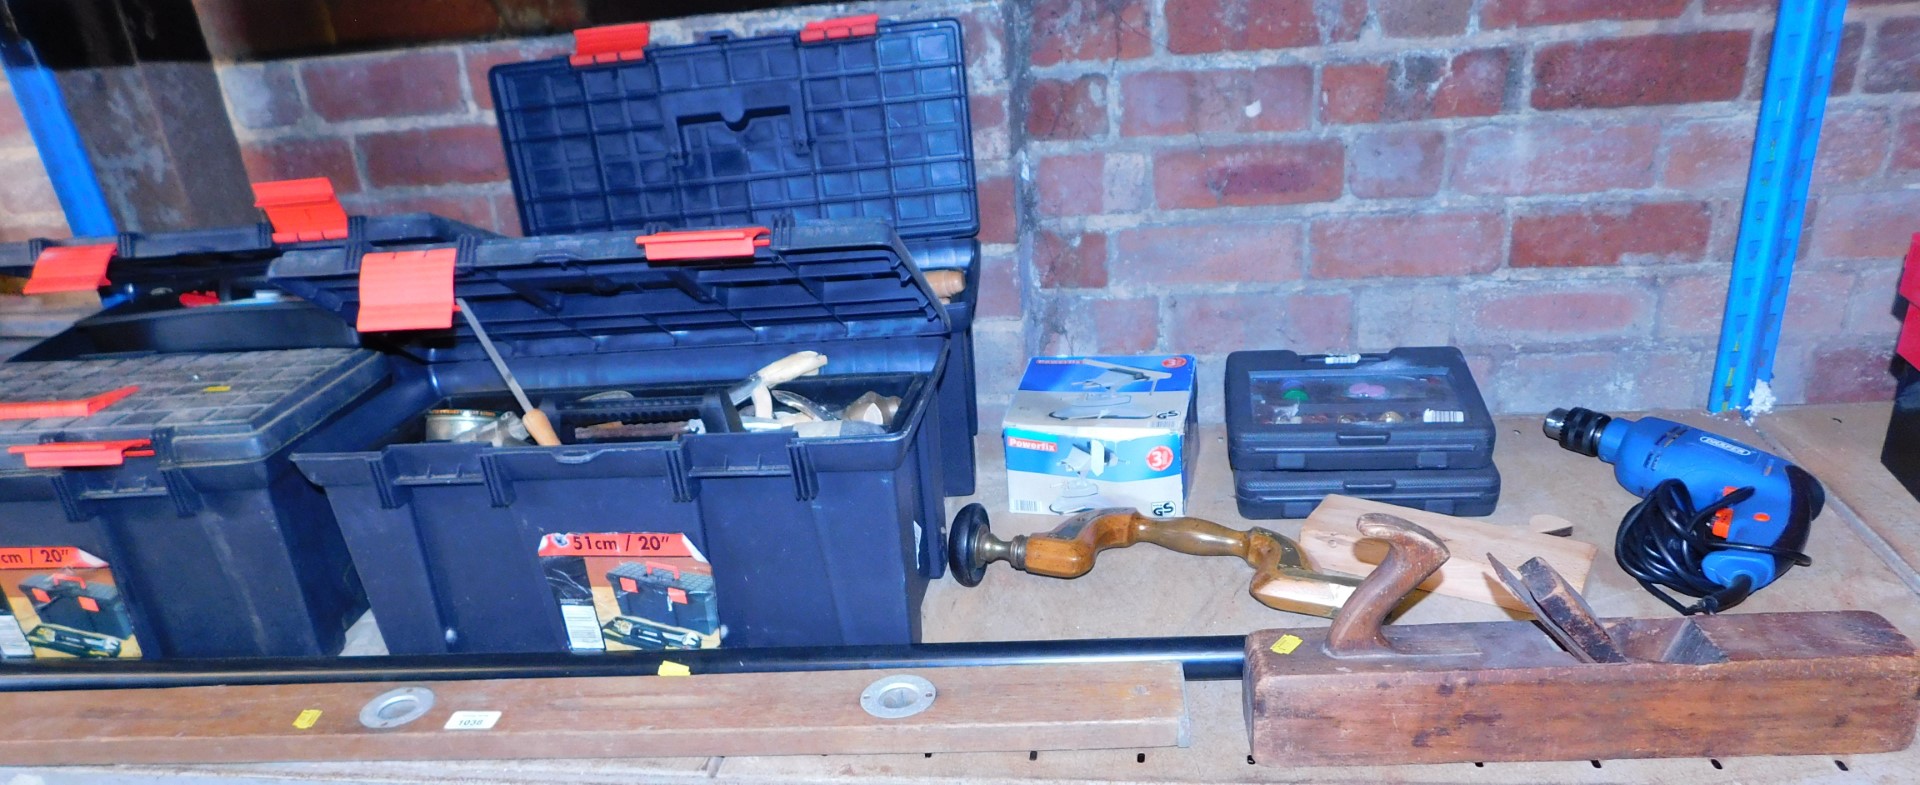 Four toolboxes containing various tools, mainly hand tools, chisels, spirit level, wood plane, hand